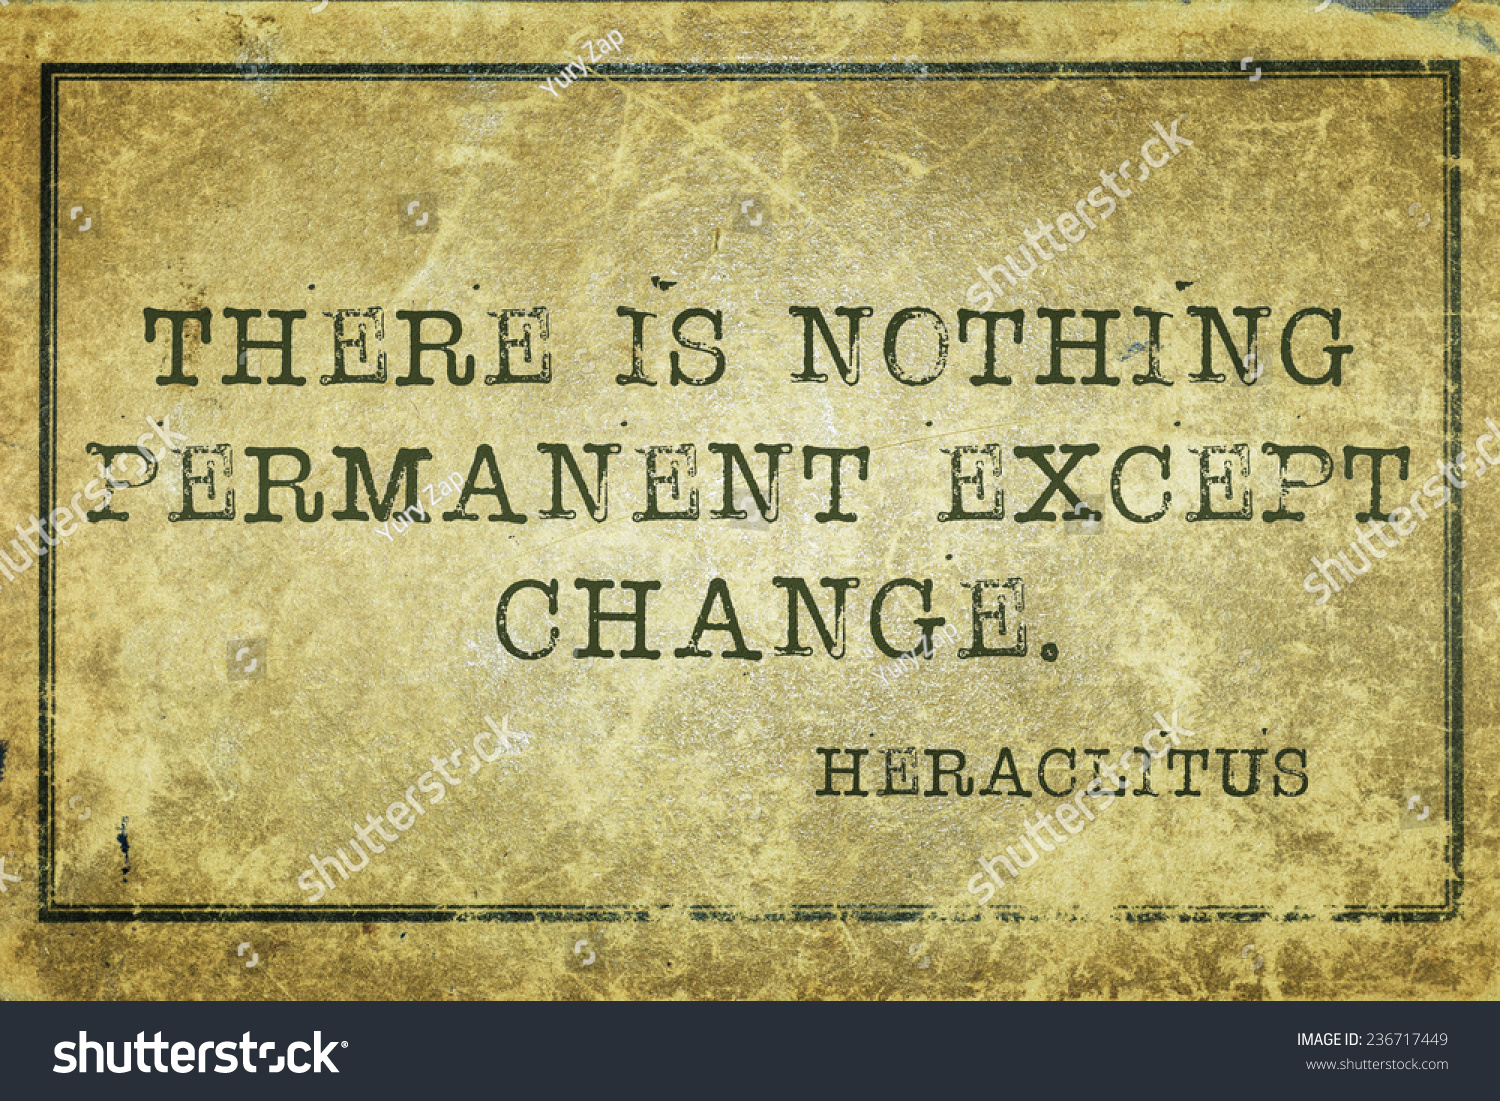 There Is Nothing Permanent Except Change - Ancient Greek ...